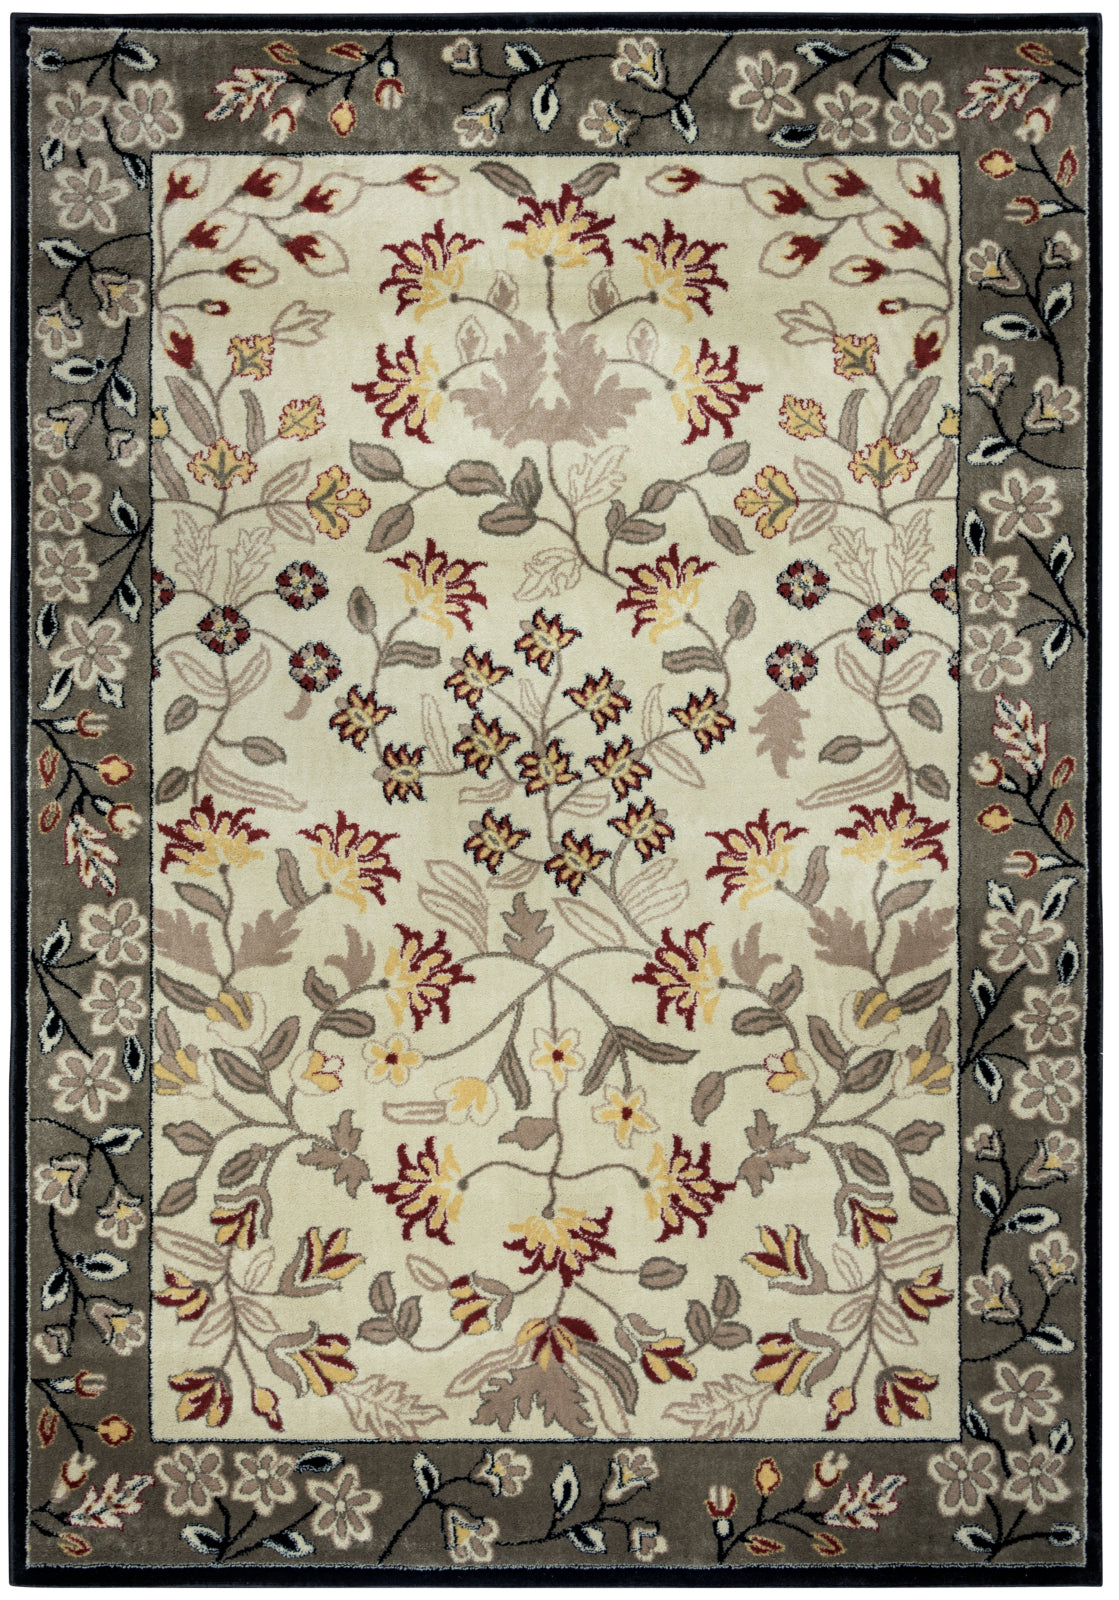 Rizzy Bay Side BS3678 Area Rug main image